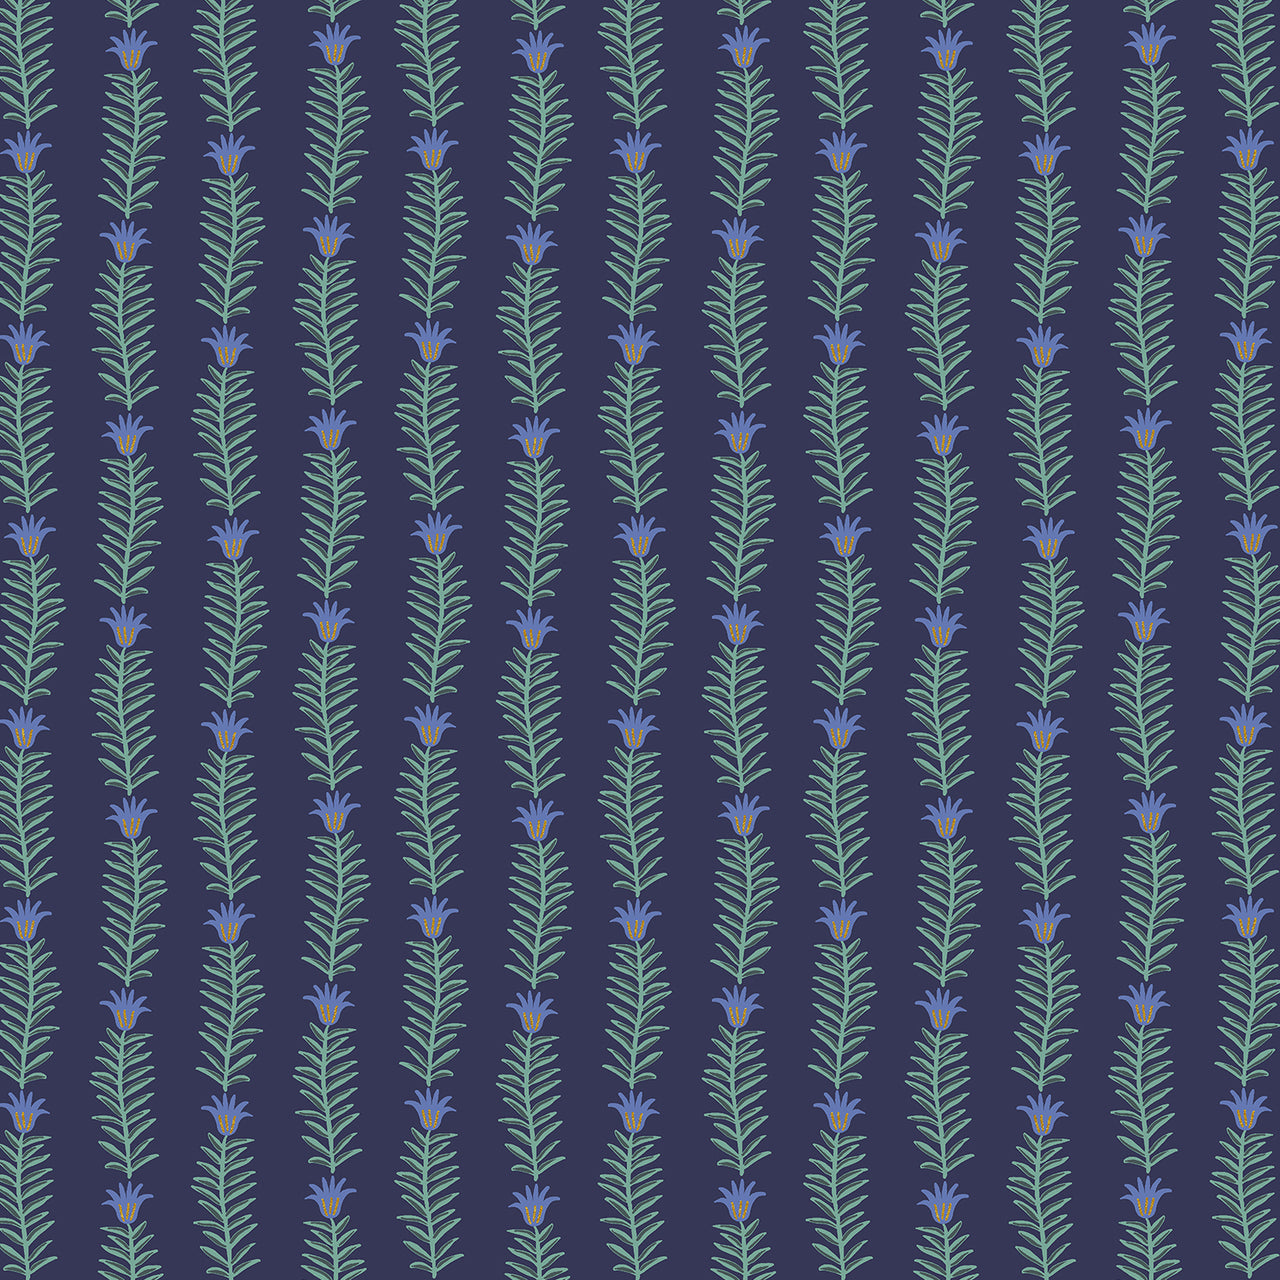 Camont by Rifle Paper Co : Rousseau Vine in Navy Metallic : Cotton and Steel